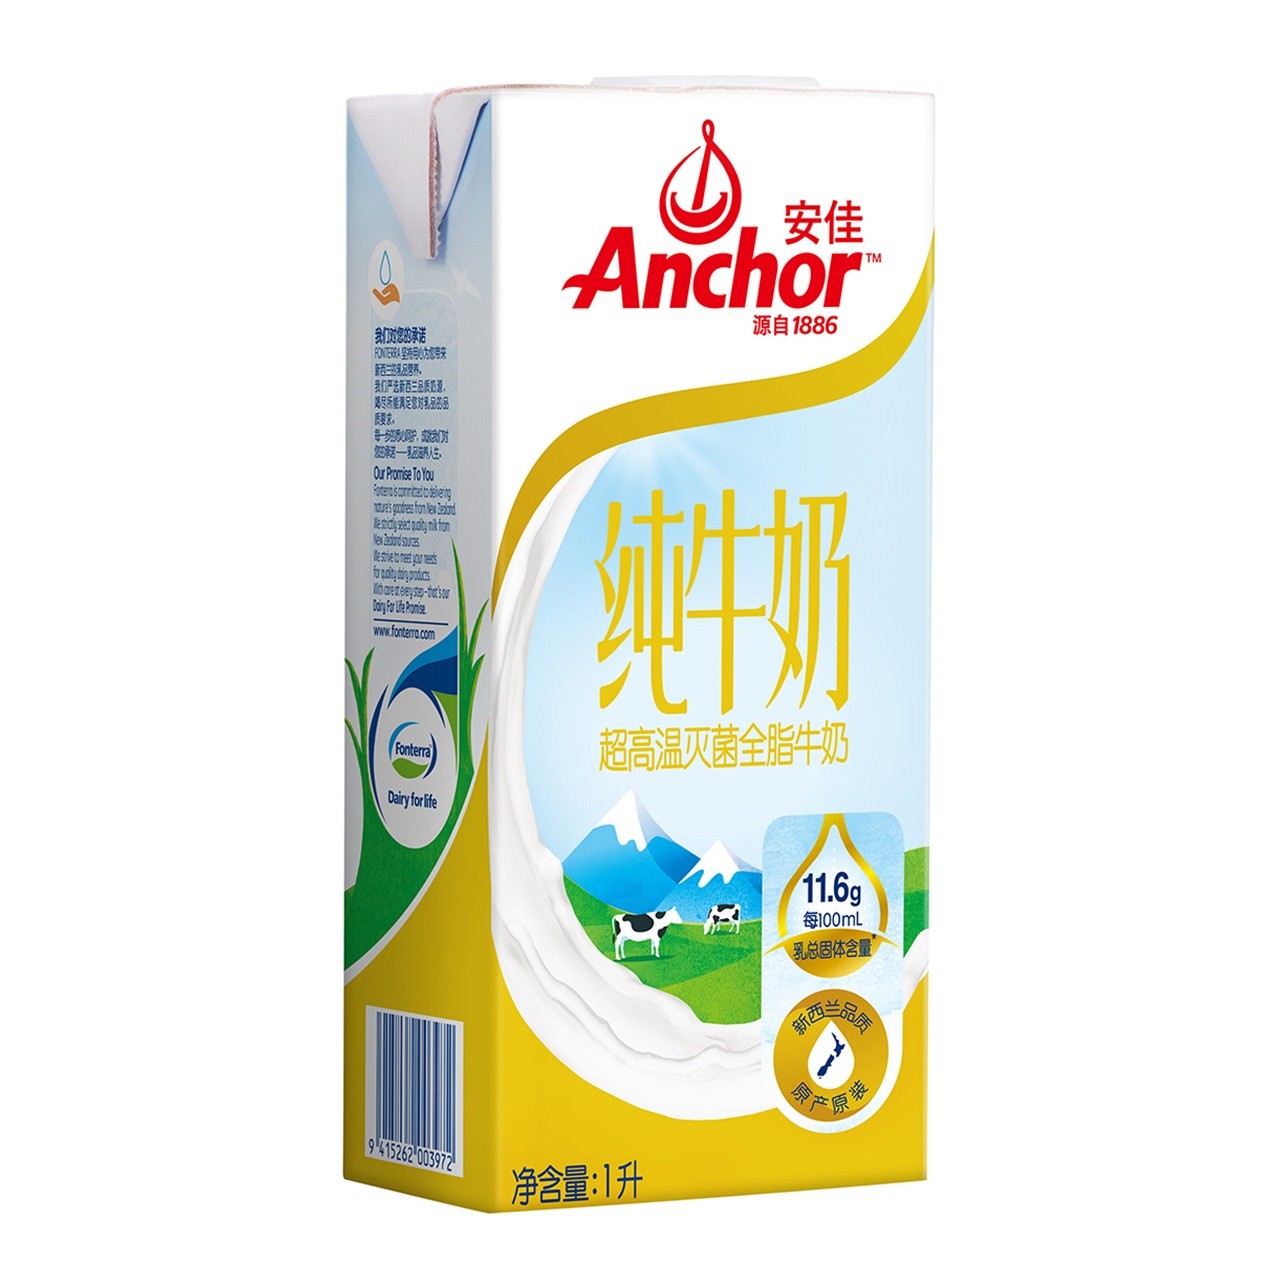 Anchor launches in China